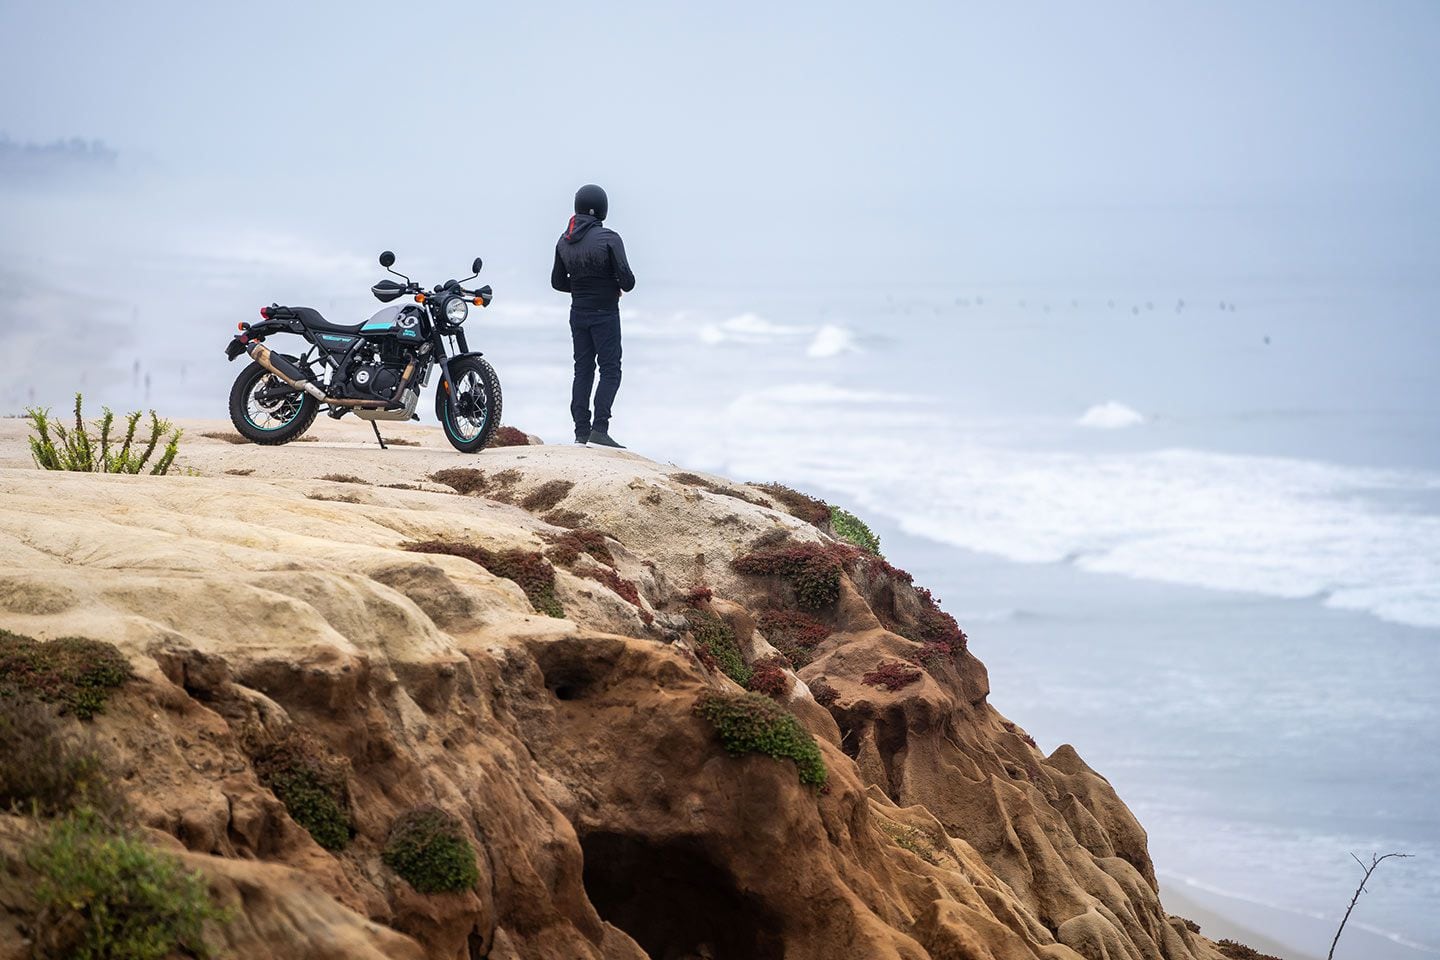 We go for a spin on Royal Enfield’s Scram 411 to experience its versatility in and out of urban areas in Southern California.